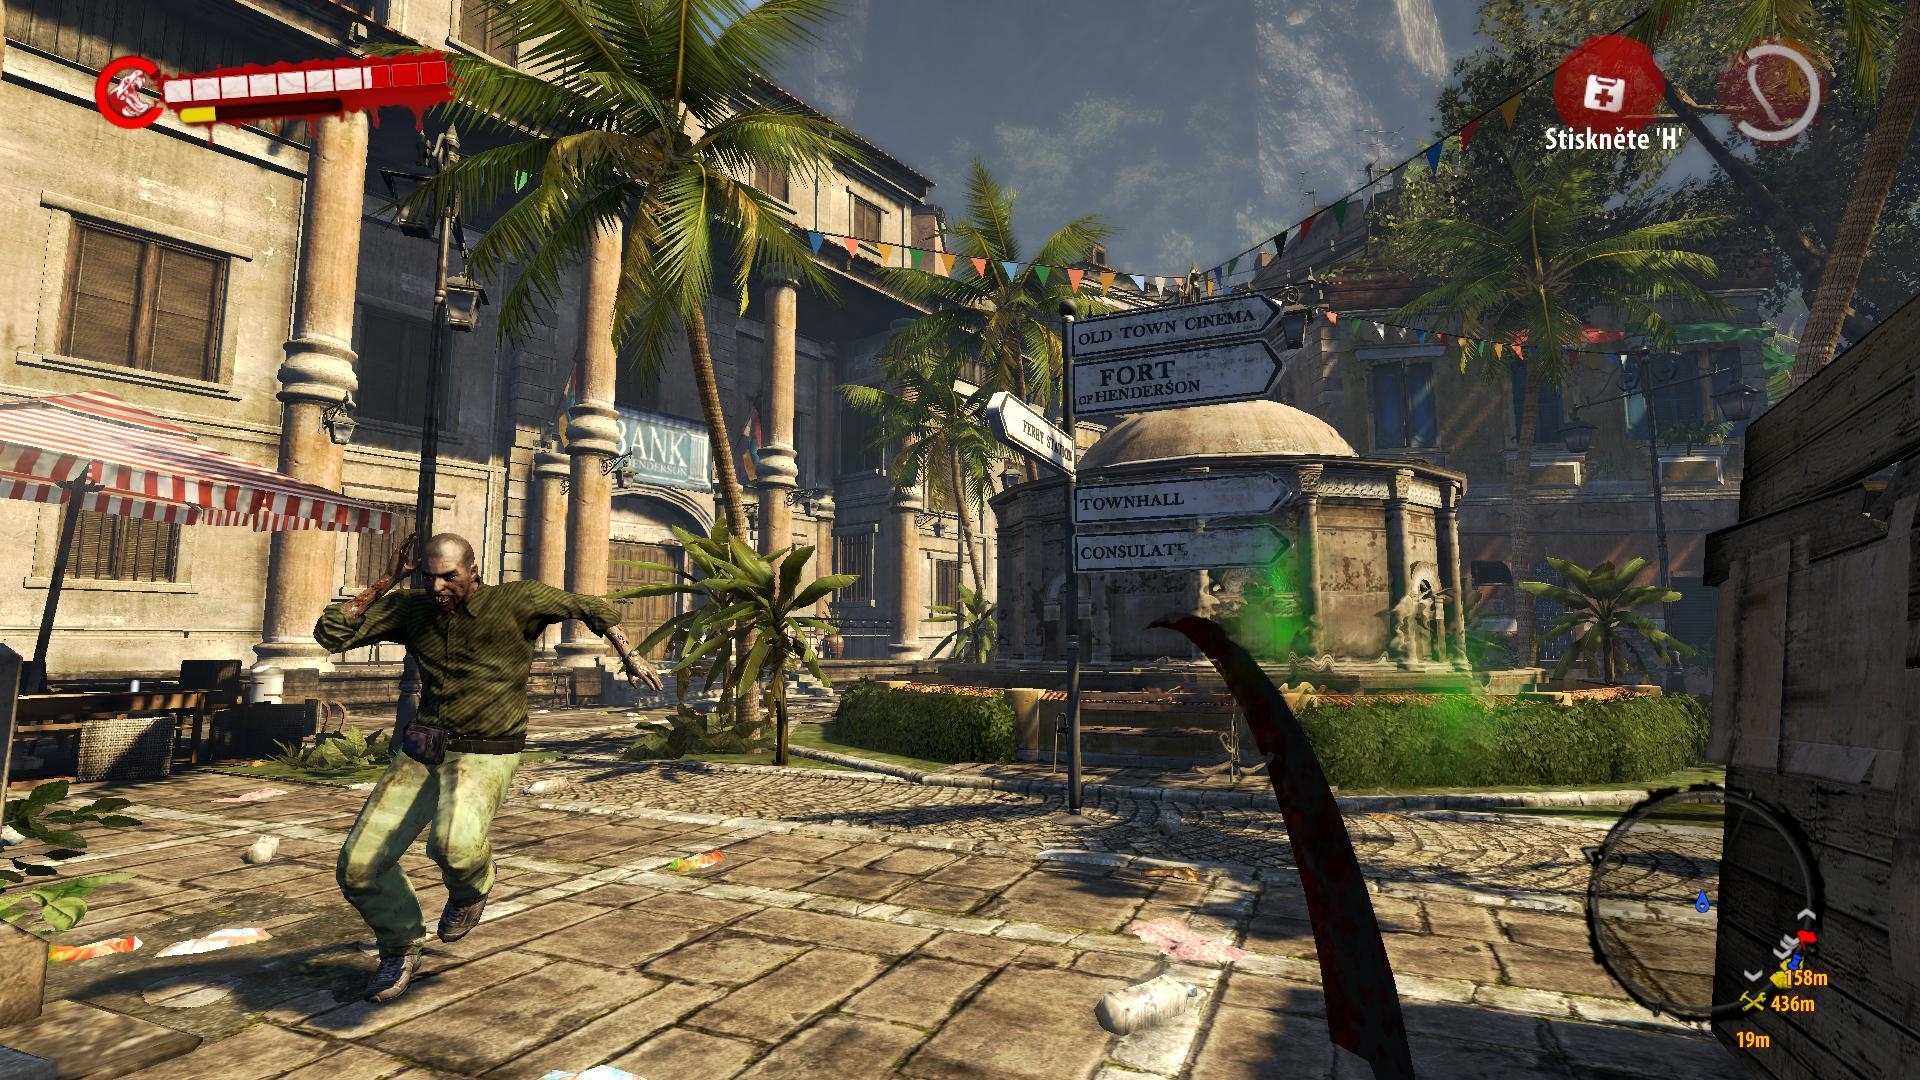 This Dead Island Riptide Wallpaper Is Available In Sizes